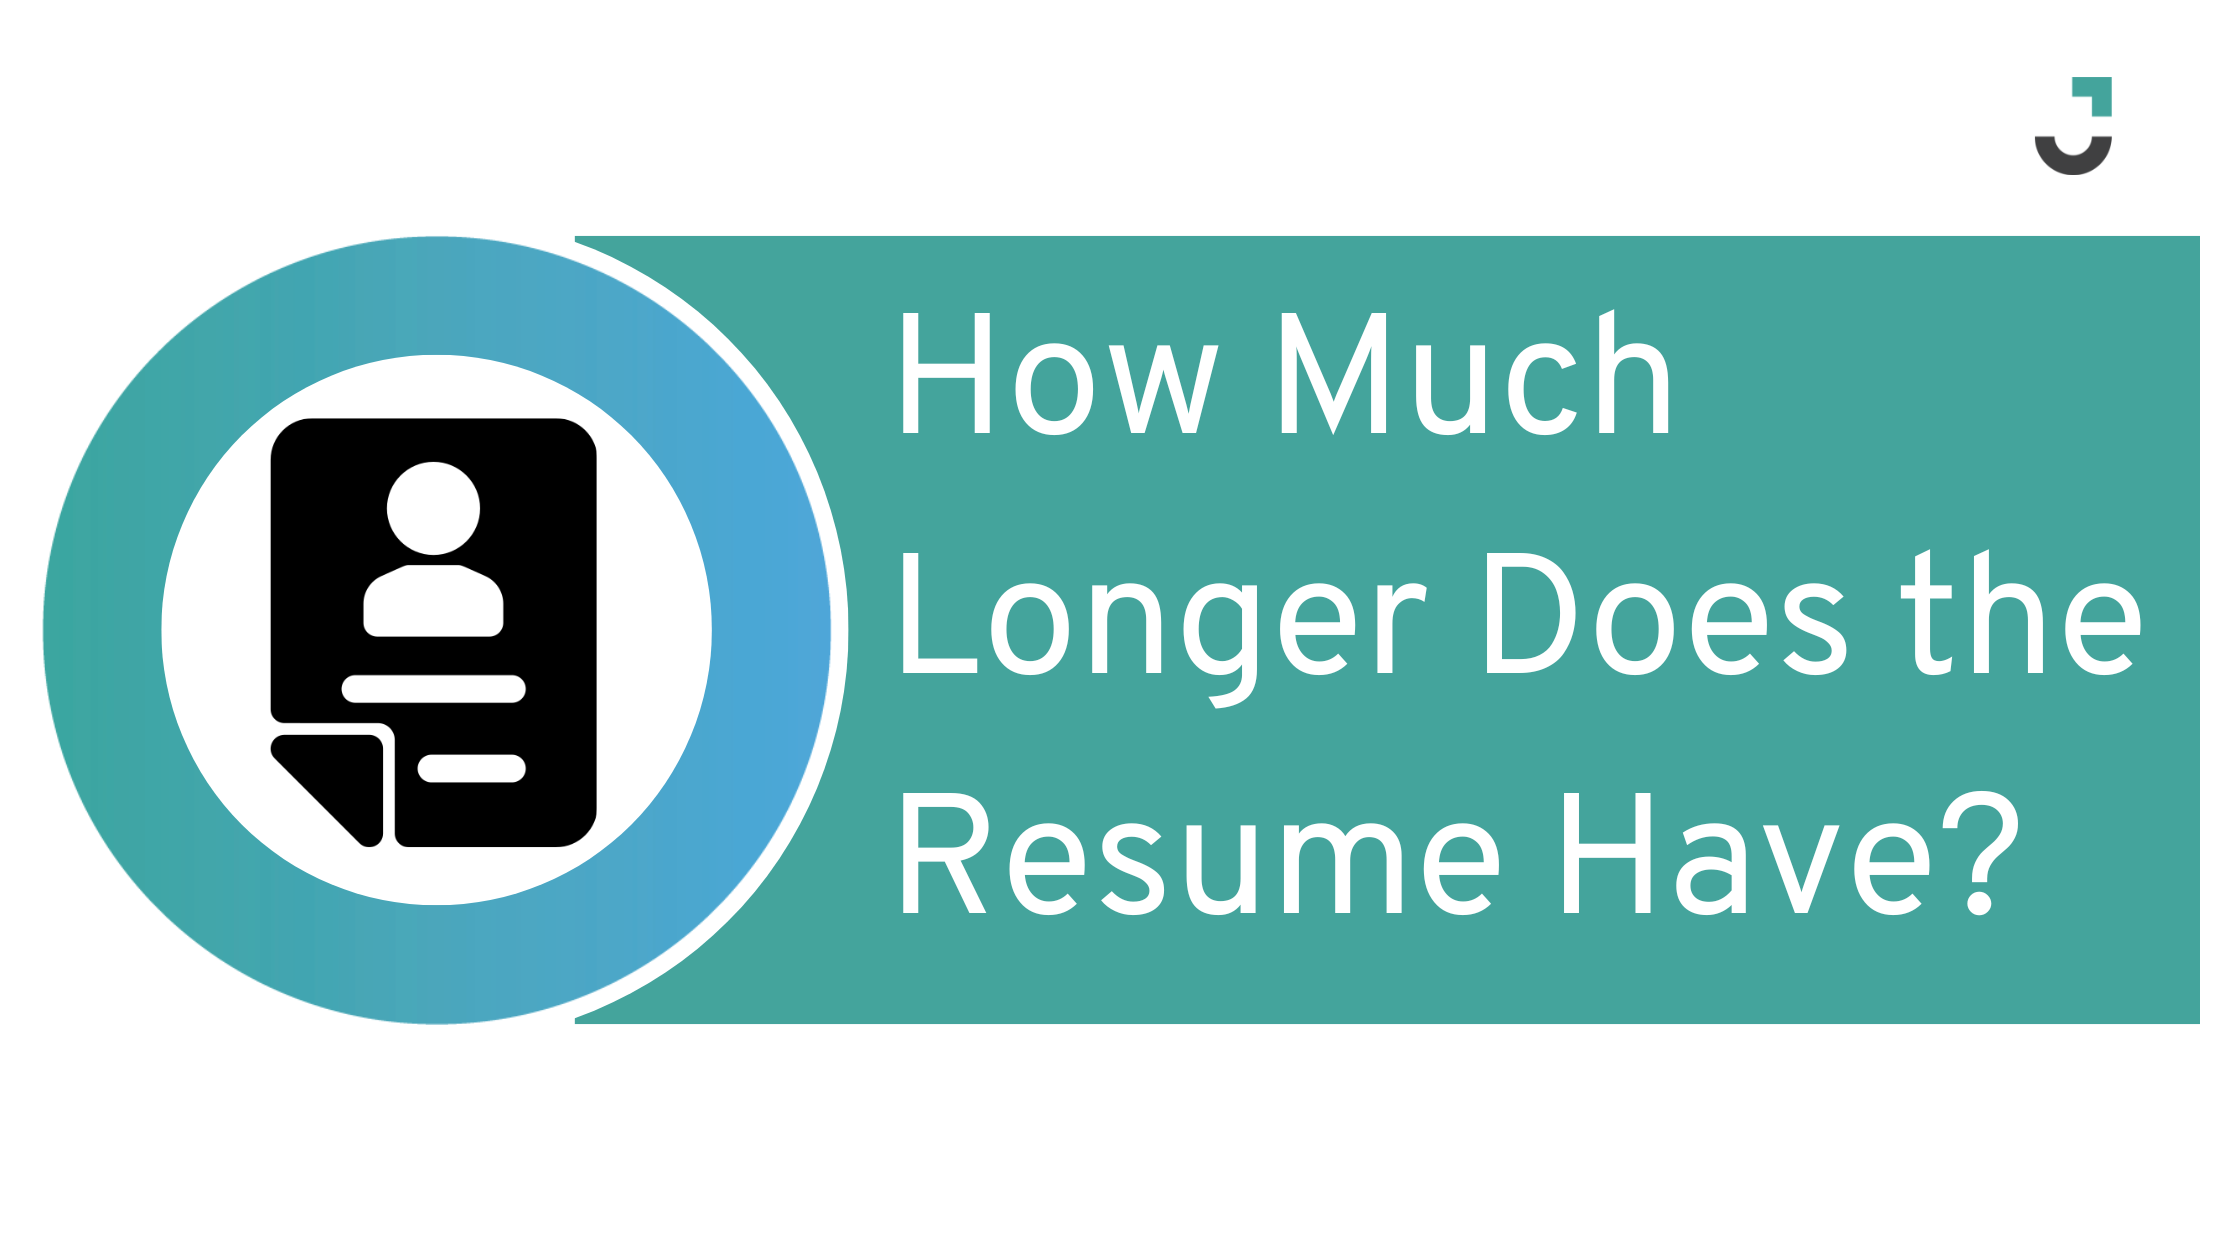 How Much Longer Does the Resume Have?